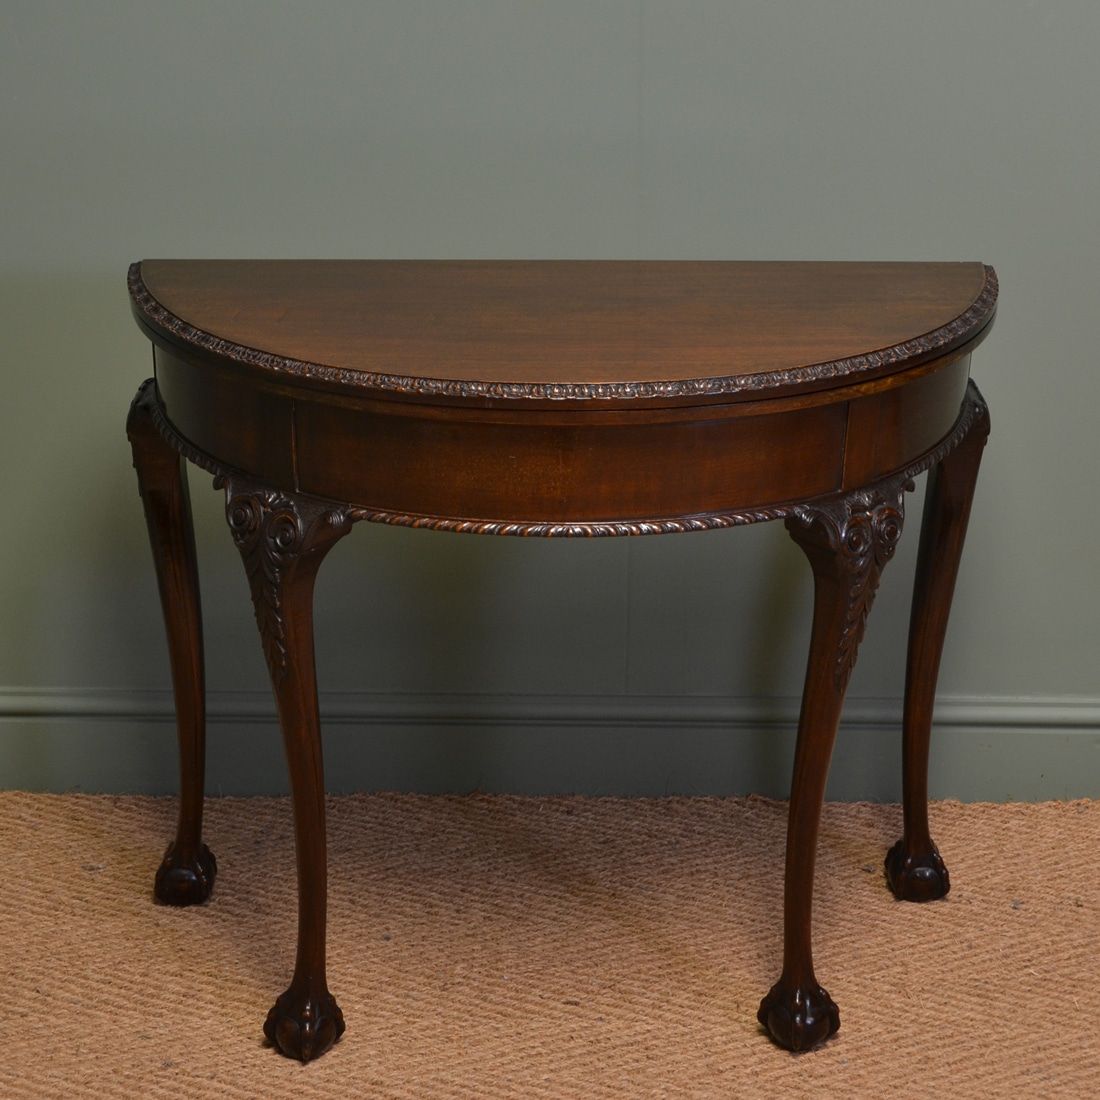 Elegant Edwardian Mahogany Antique Console / Games Table Within Antique Console Tables (View 15 of 20)